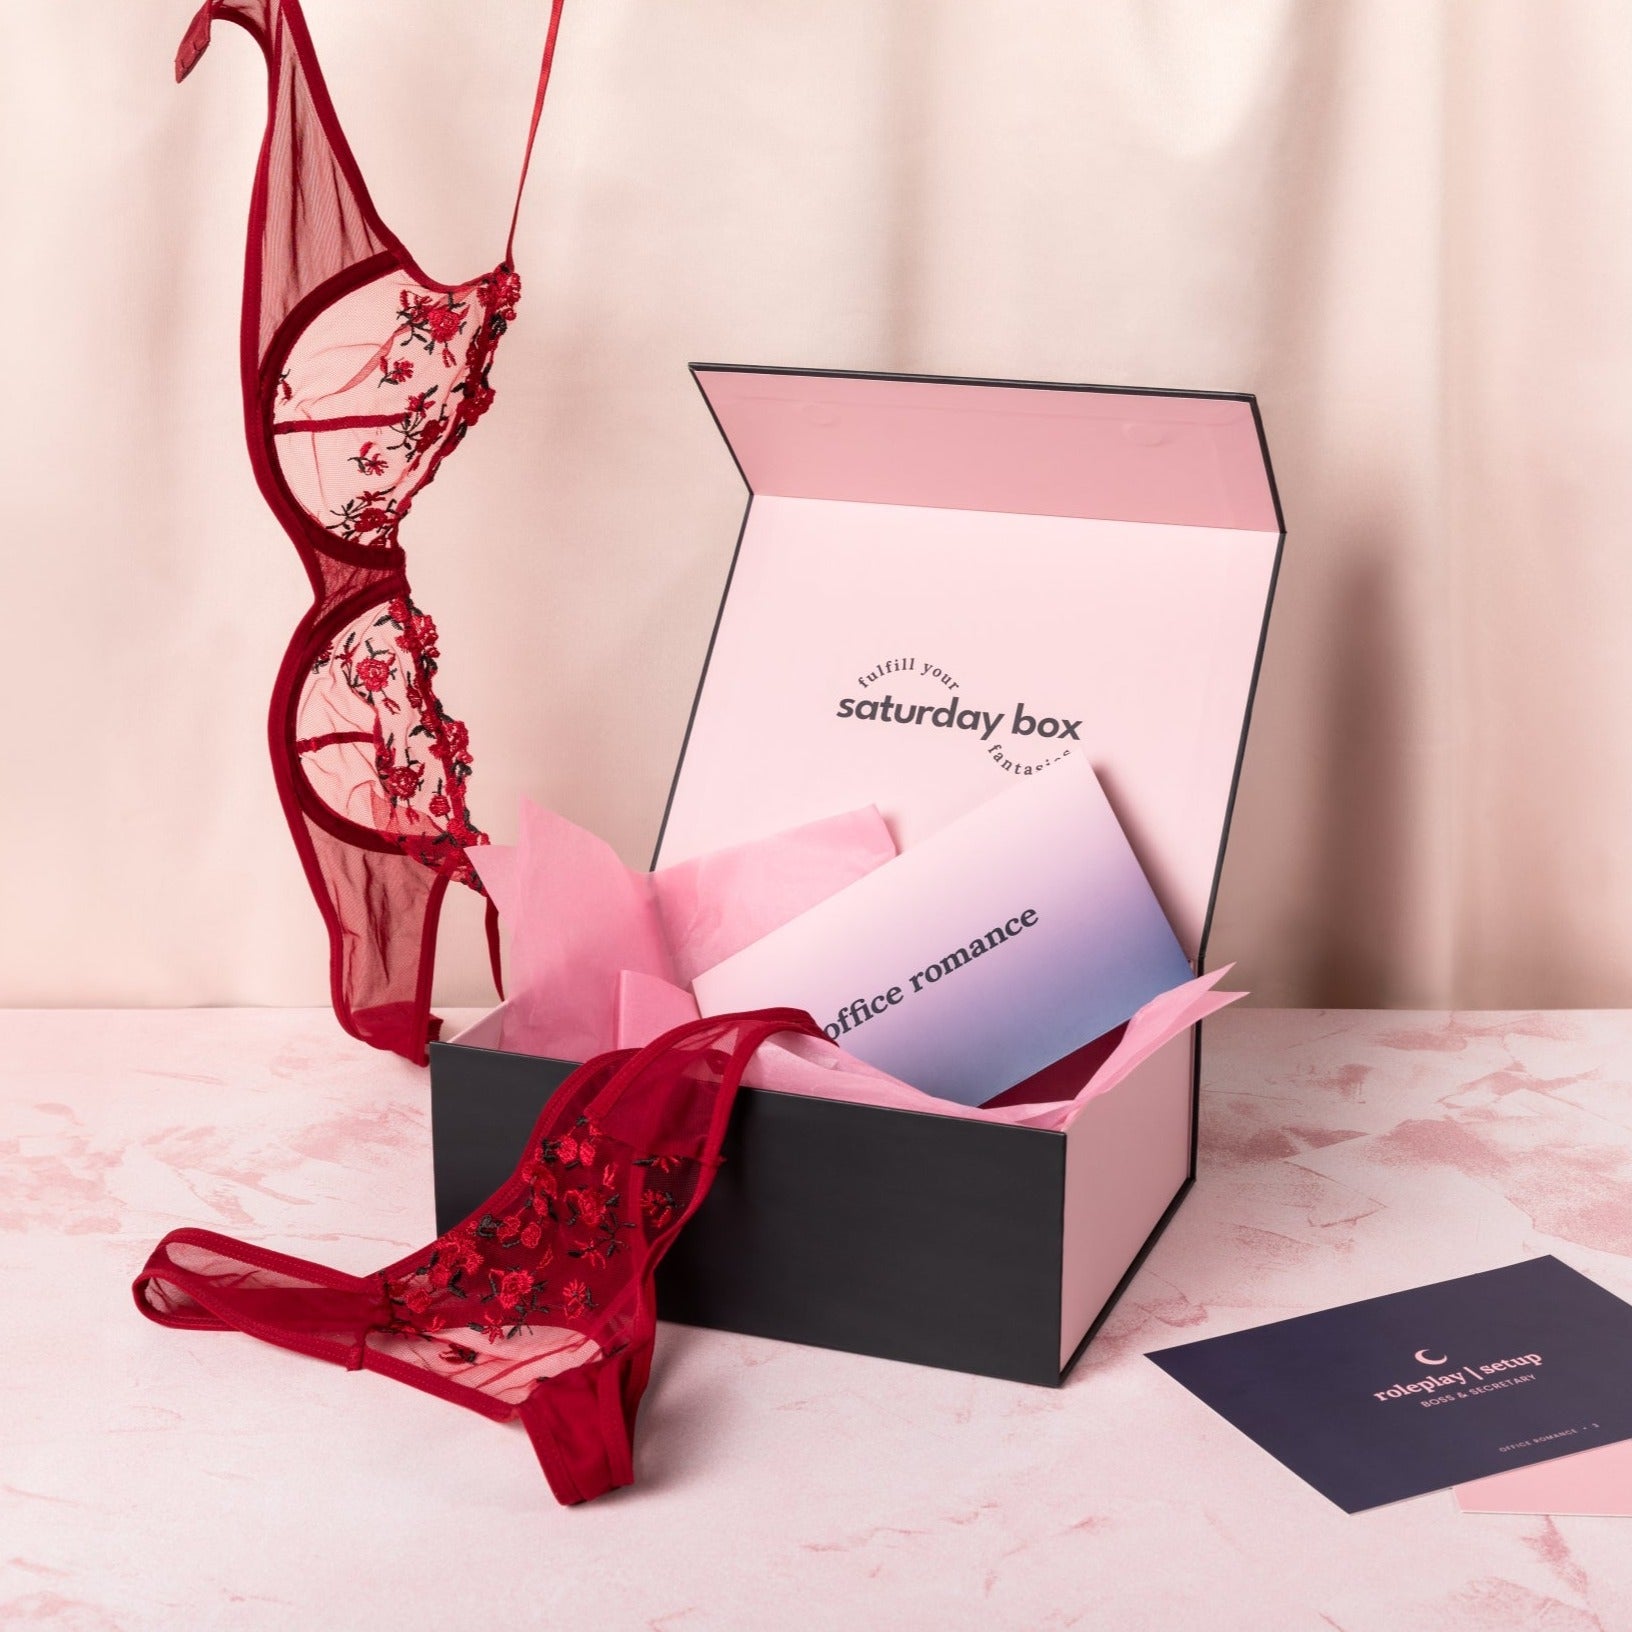 Opened Office Romance Classic Box with pink tissue paper and branded envelope inside with floral lingerie bra dangling from the top of frame and panties draped over the edge of the box. Gameplay cards are in the foreground next to the box.